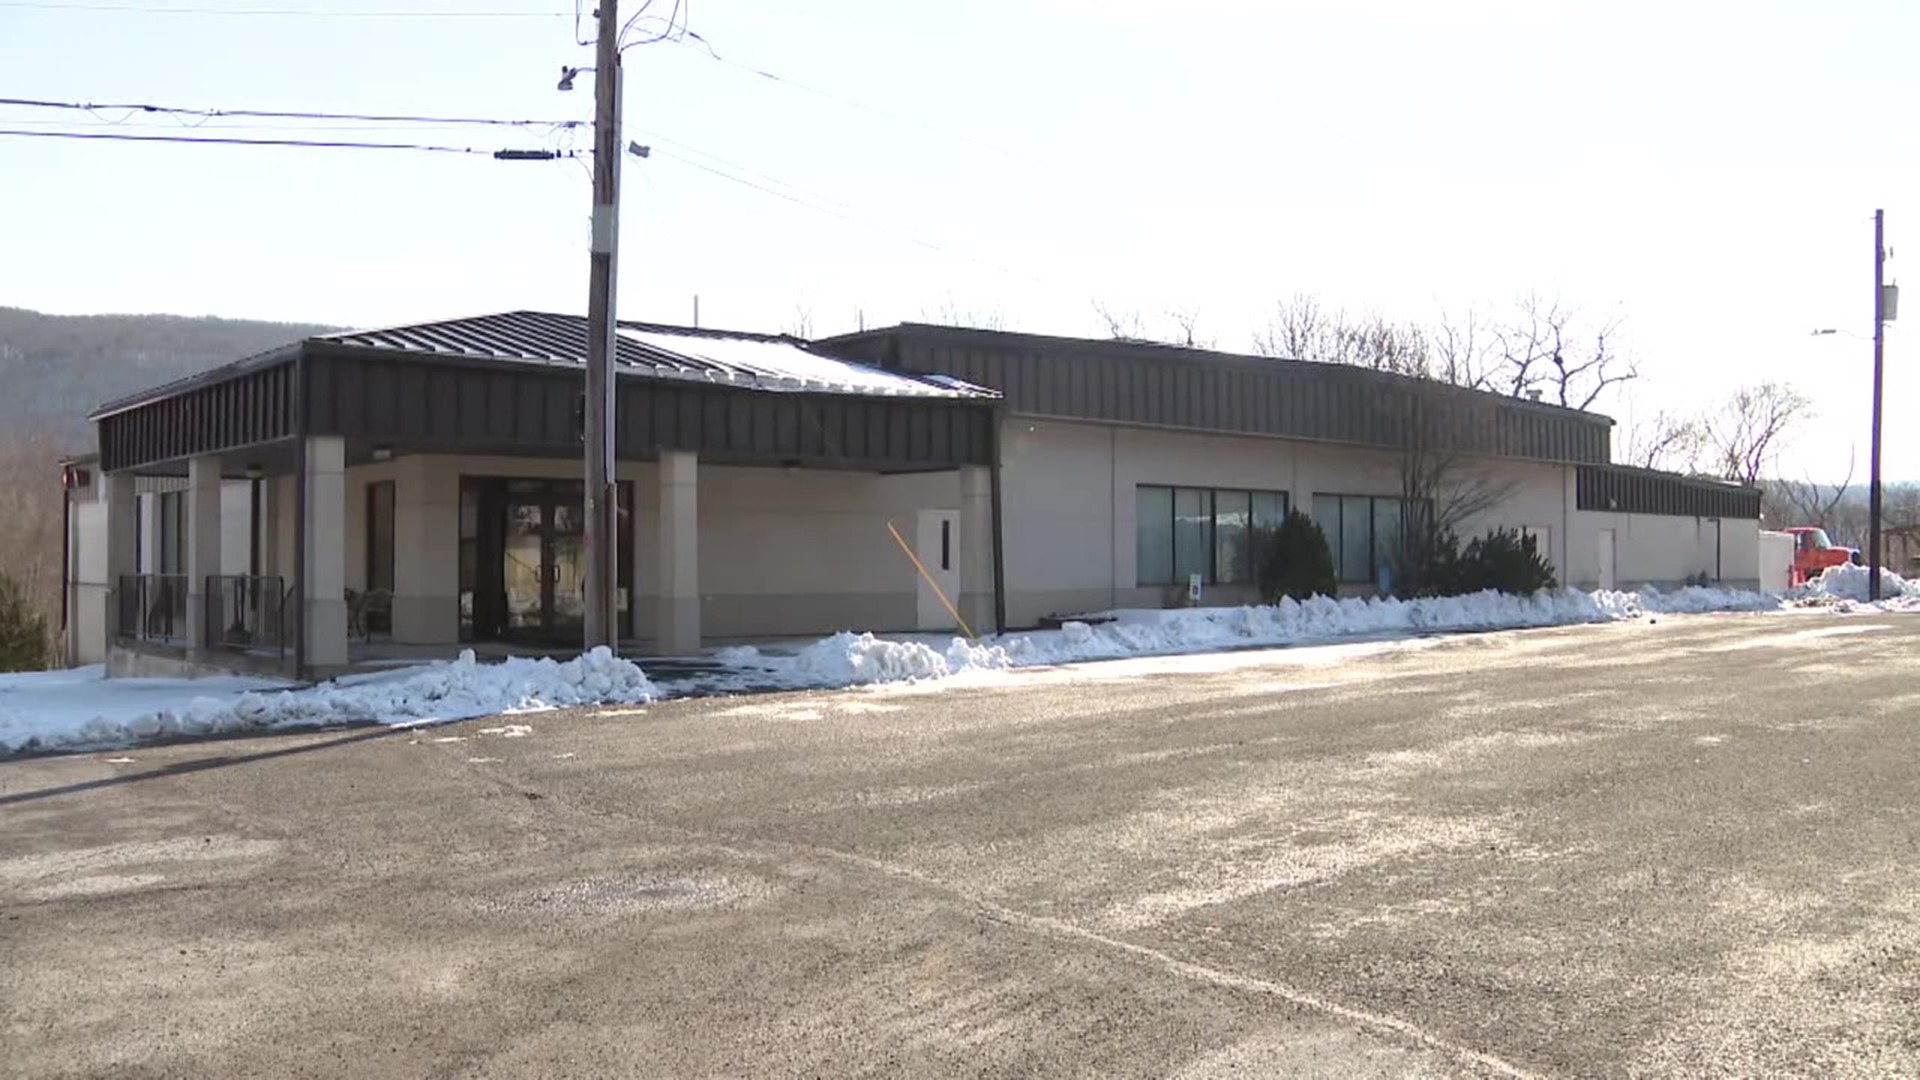 More than 800 people signed an online petition to preserve the roller rink in Memorial Hall.